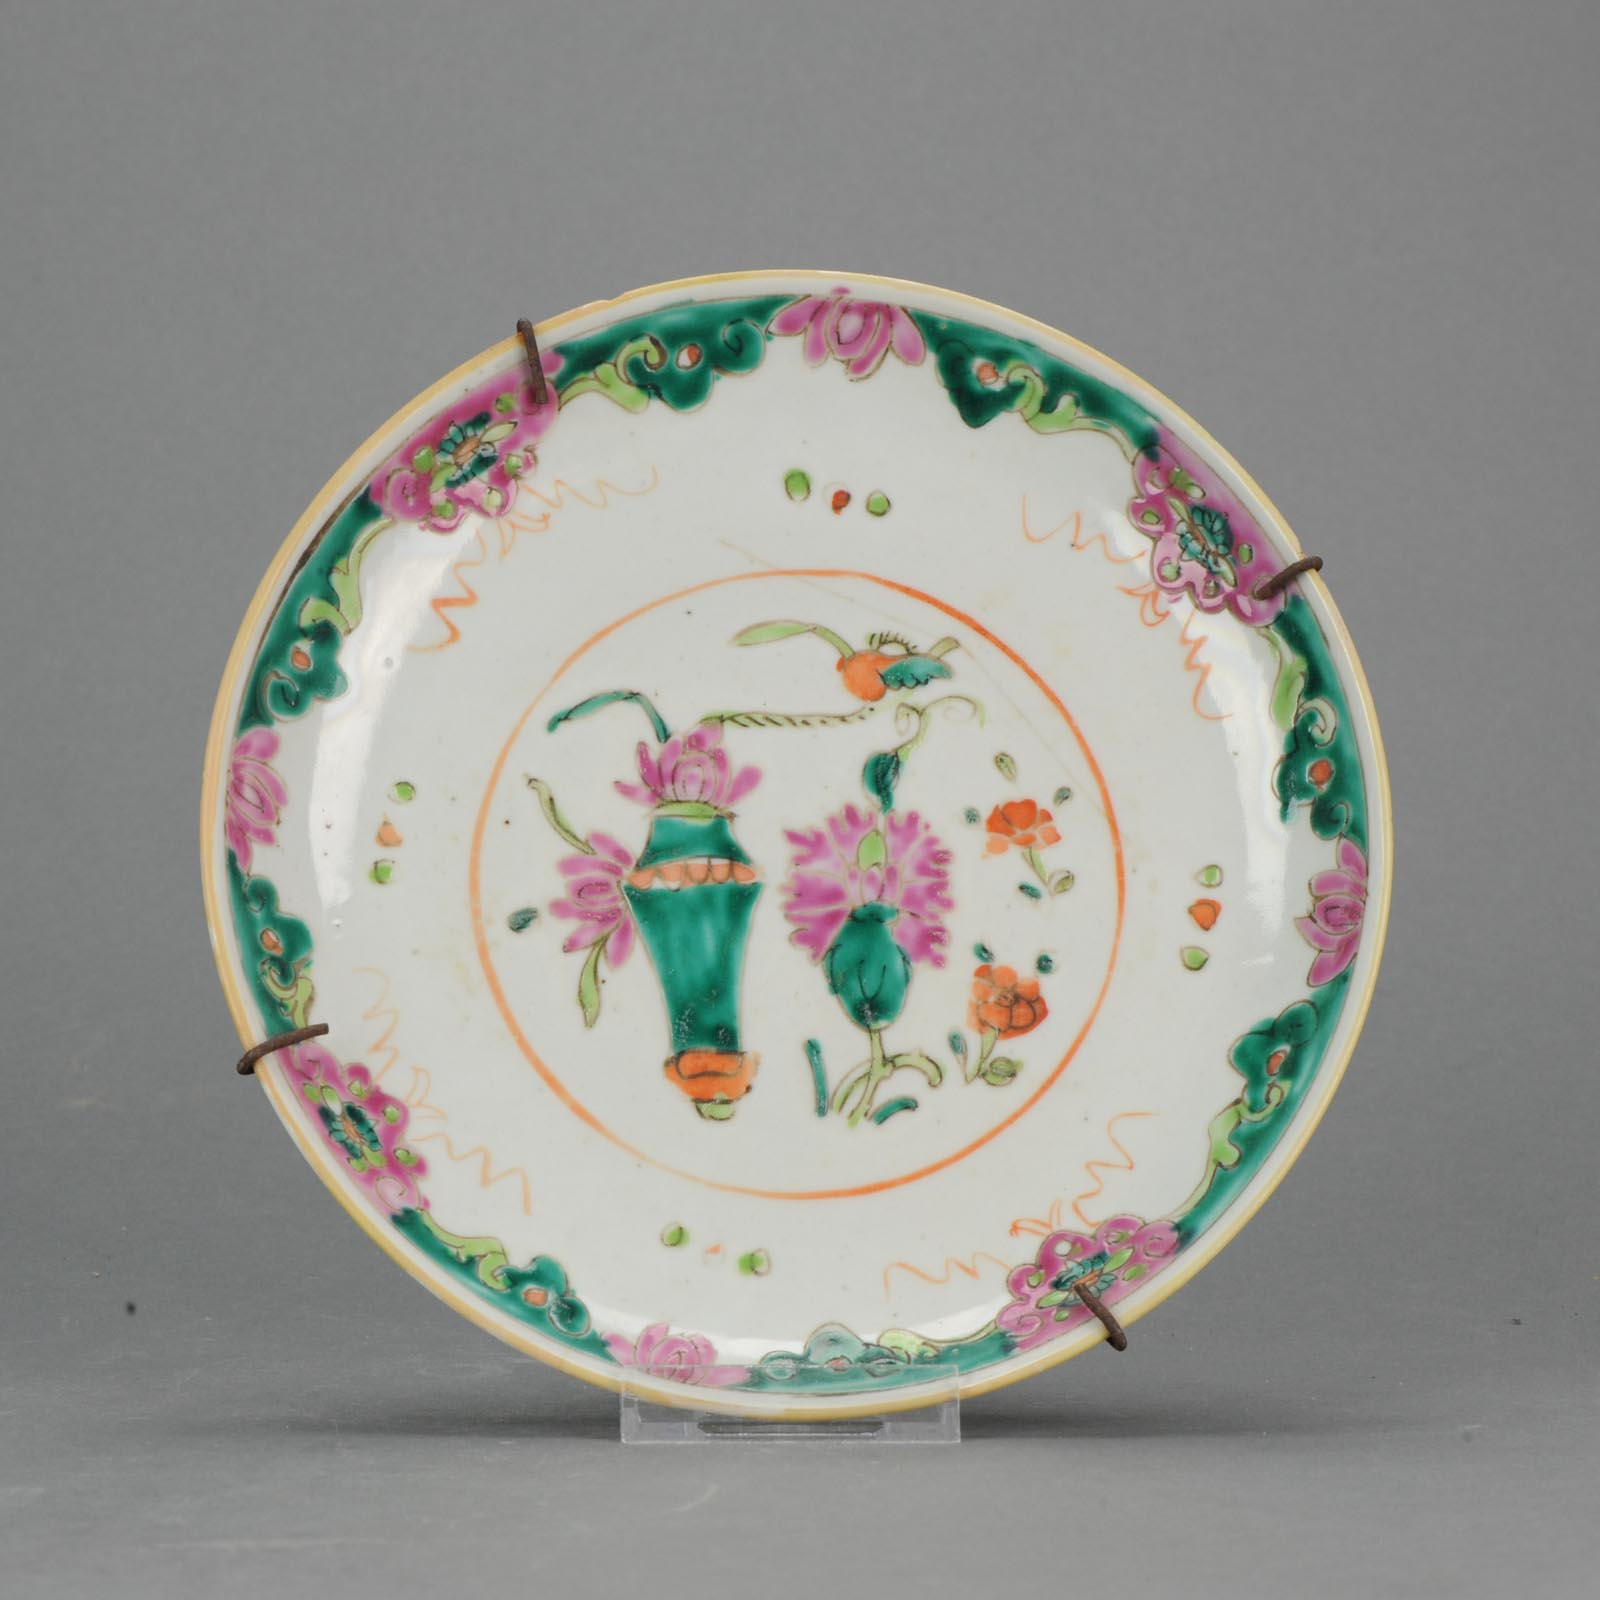 19C Chinese Porcelain Famille Rose Flower Baskets Plate Marked